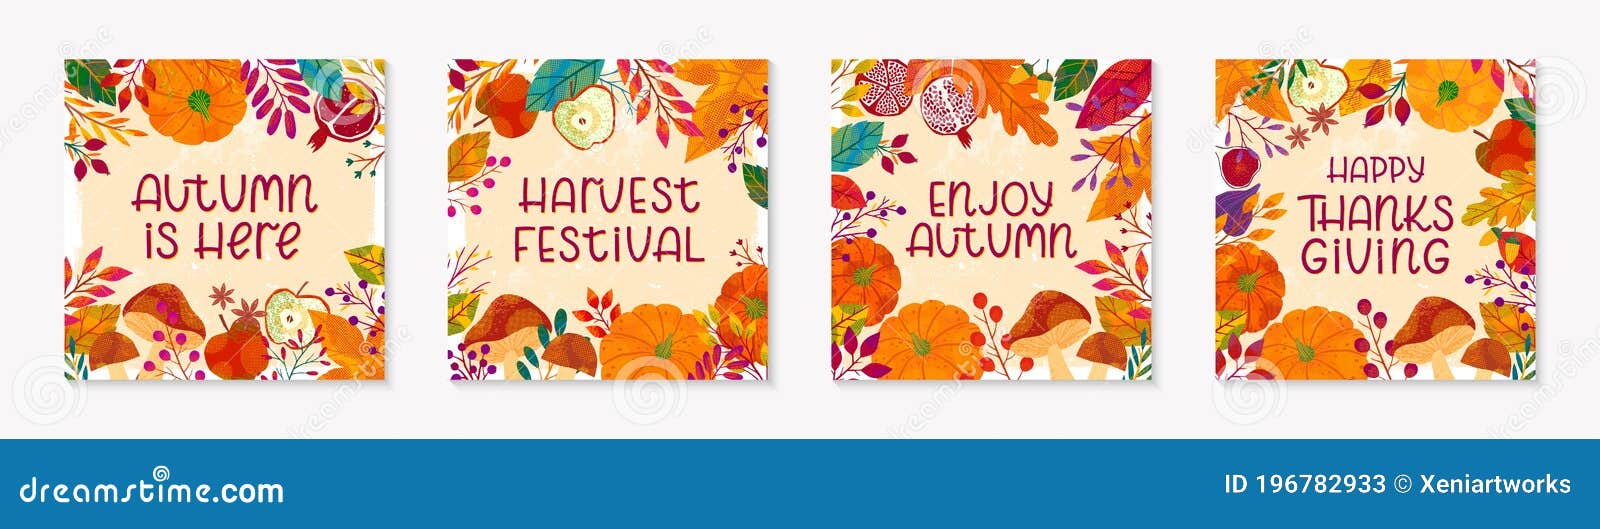 autumn seasonals postes with leaves and floral s in fall colors